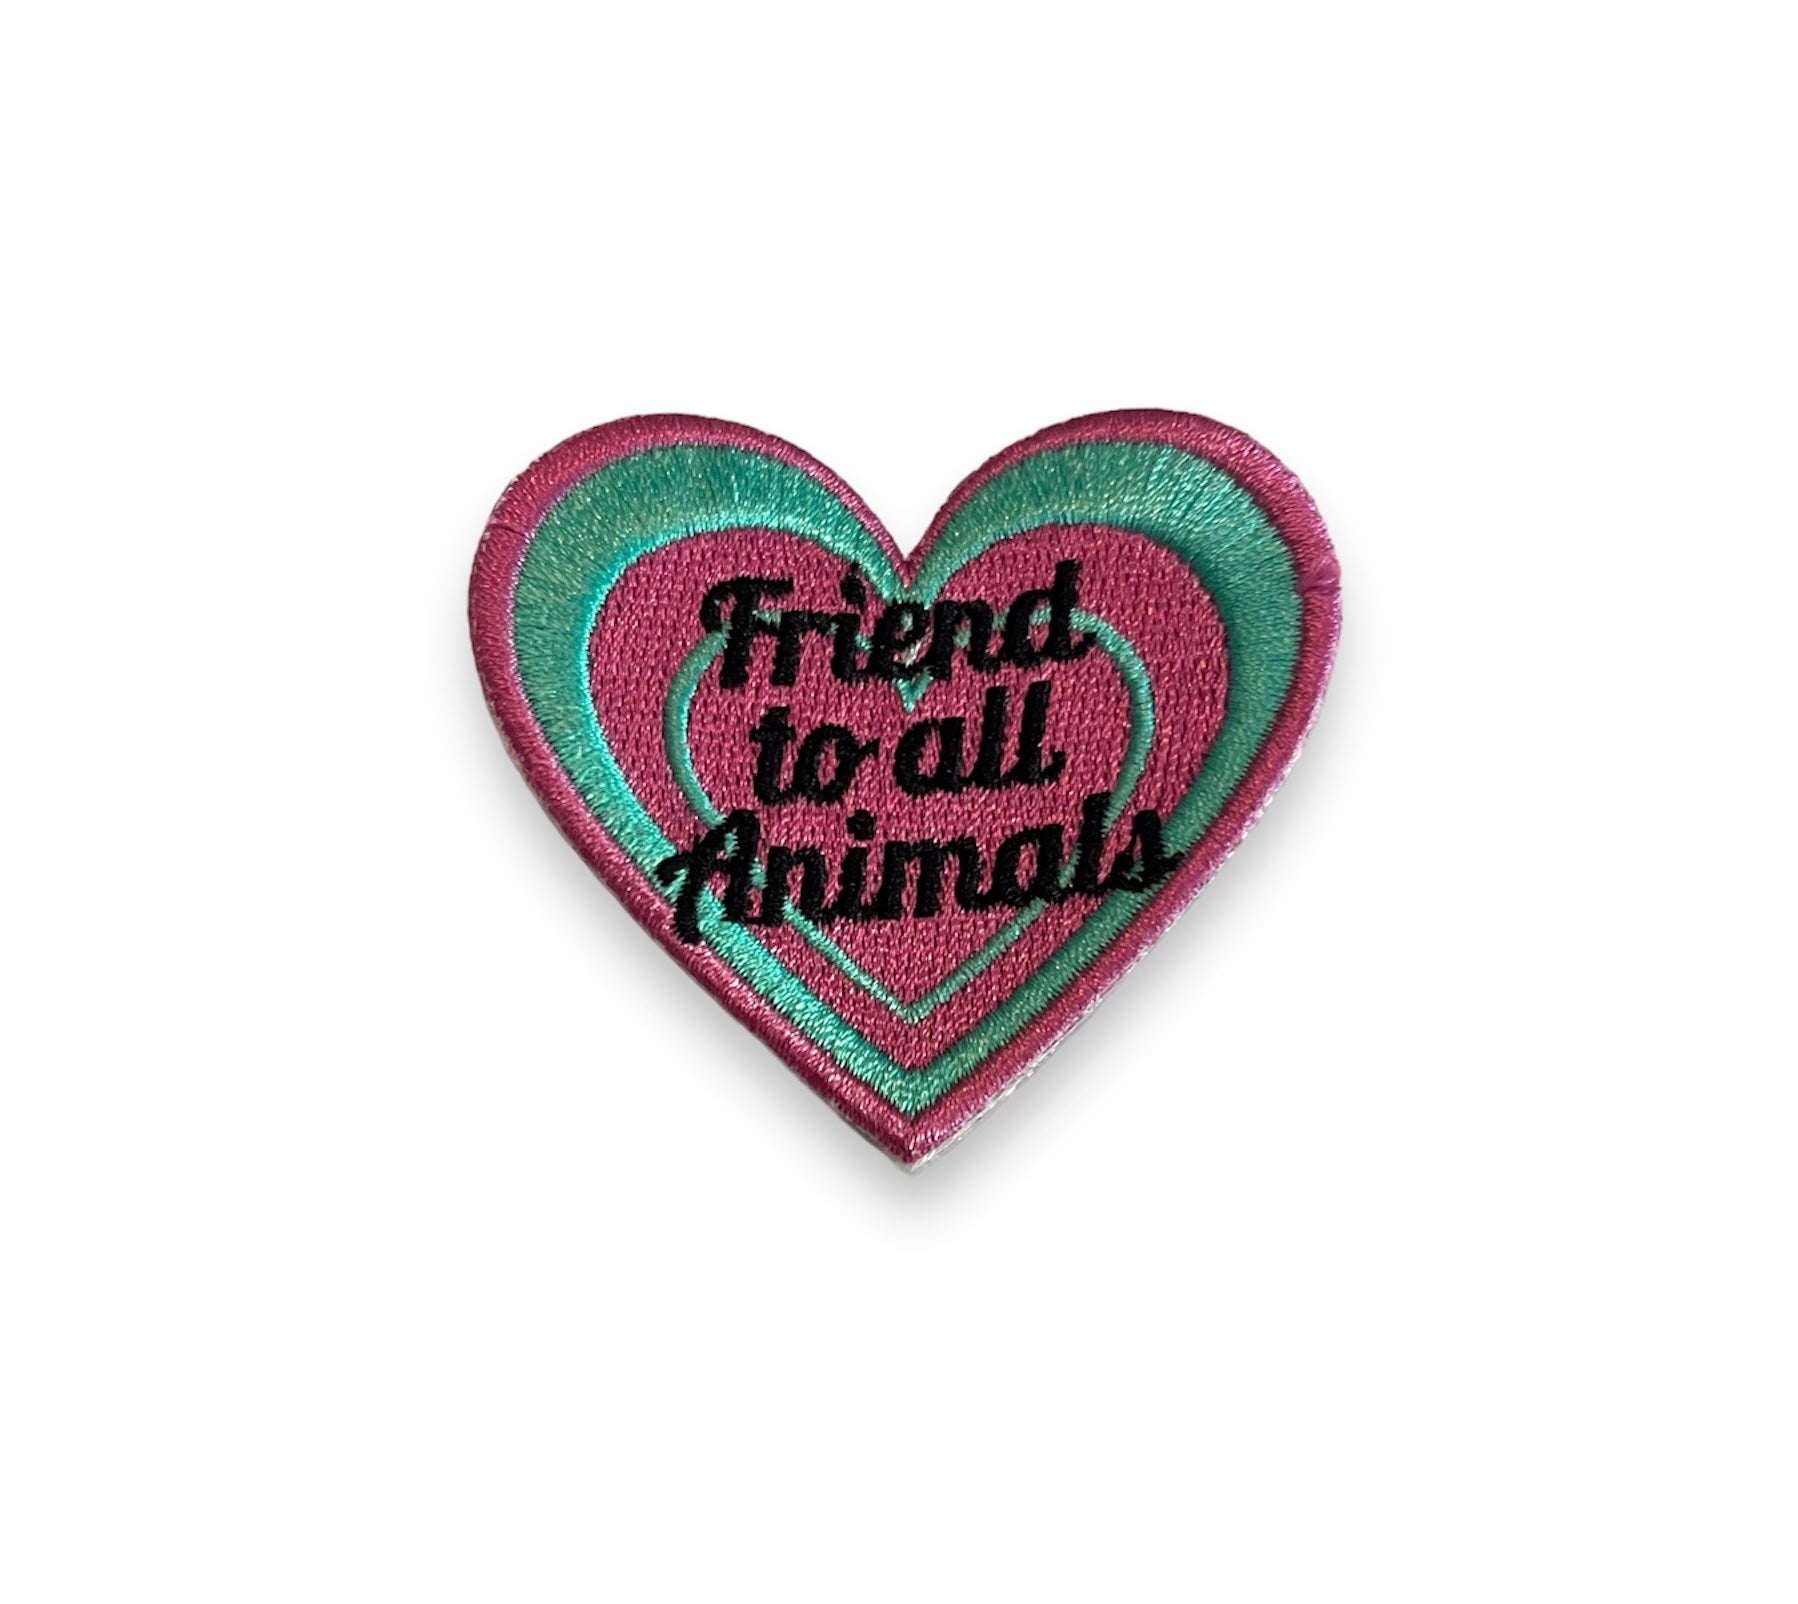 Friend to All Animals Iron On Patch